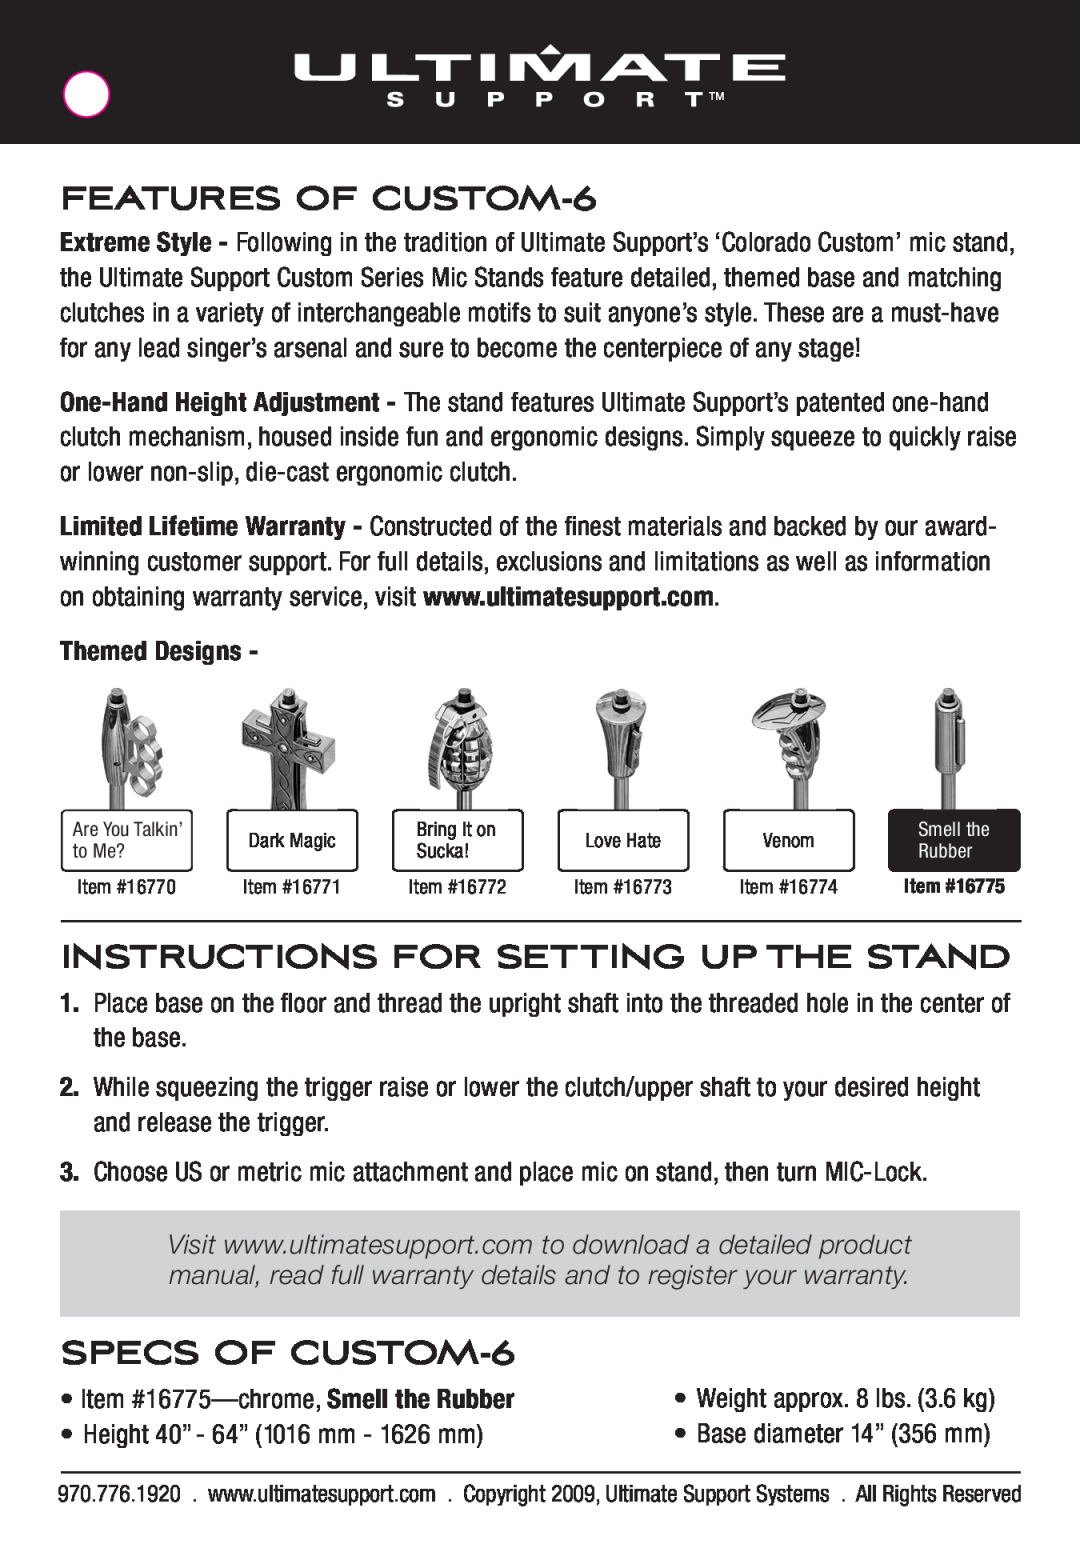 Ultimate Support Systems FEATURES OF CUSTOM-6, Instructions For Setting Up The Stand, SPECS OF CUSTOM-6, Themed Designs 